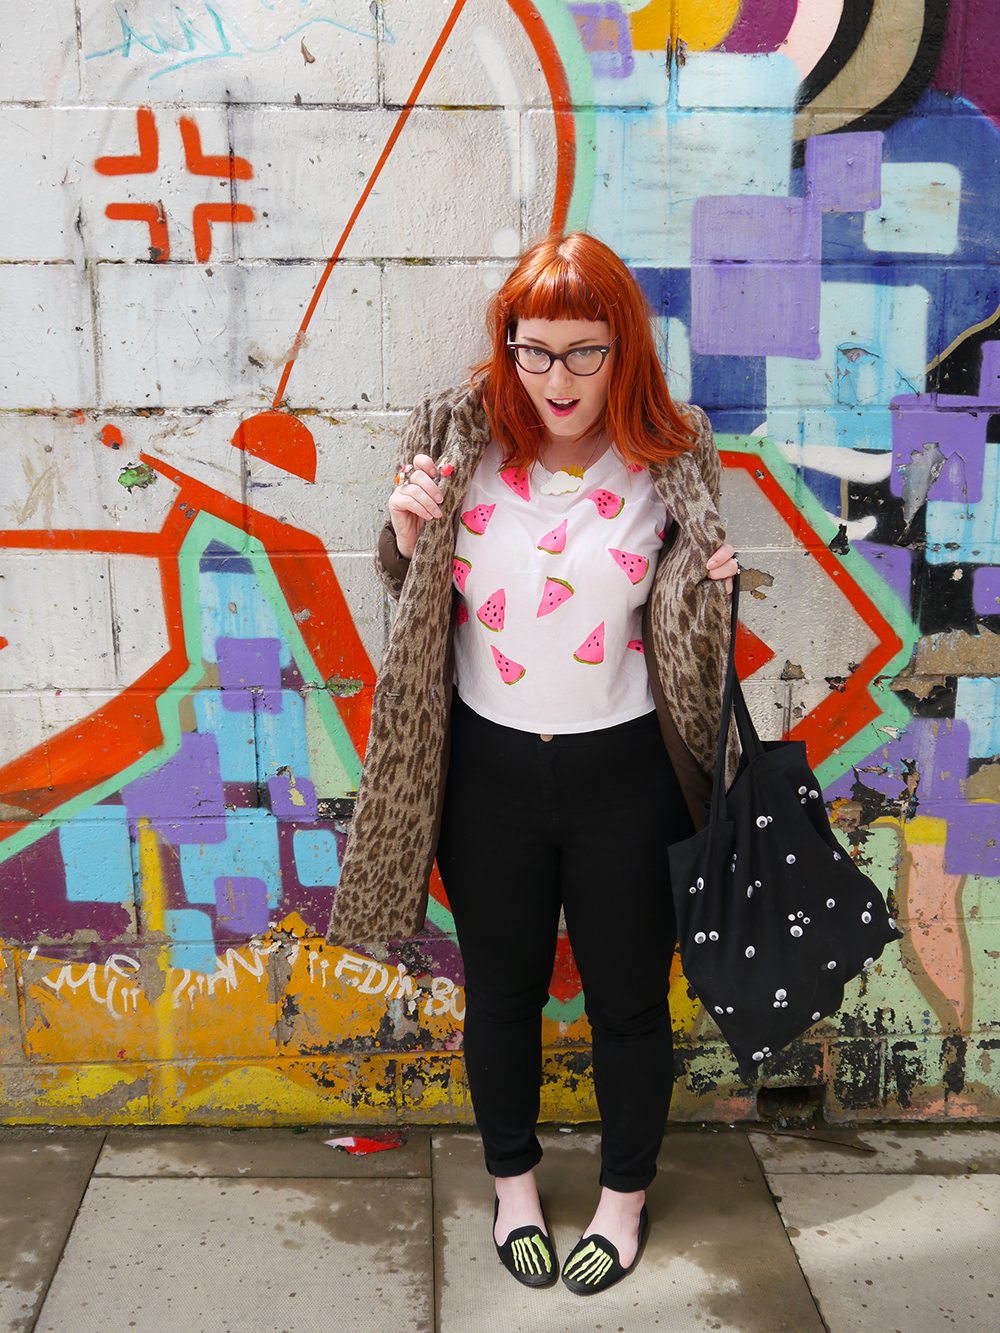 Etsy Craft Party, Edinburgh, crafting, diy project, DIY fashion, watermelon print, Warehouse Leopard print coat, New Look jeans, Youth Rise Up skeleton shoes, Sugar and Vice, Sugar & Vice weather necklace, eye bag, googly eye, Scottish Fashion blogger, fashion blogger, blogging duo